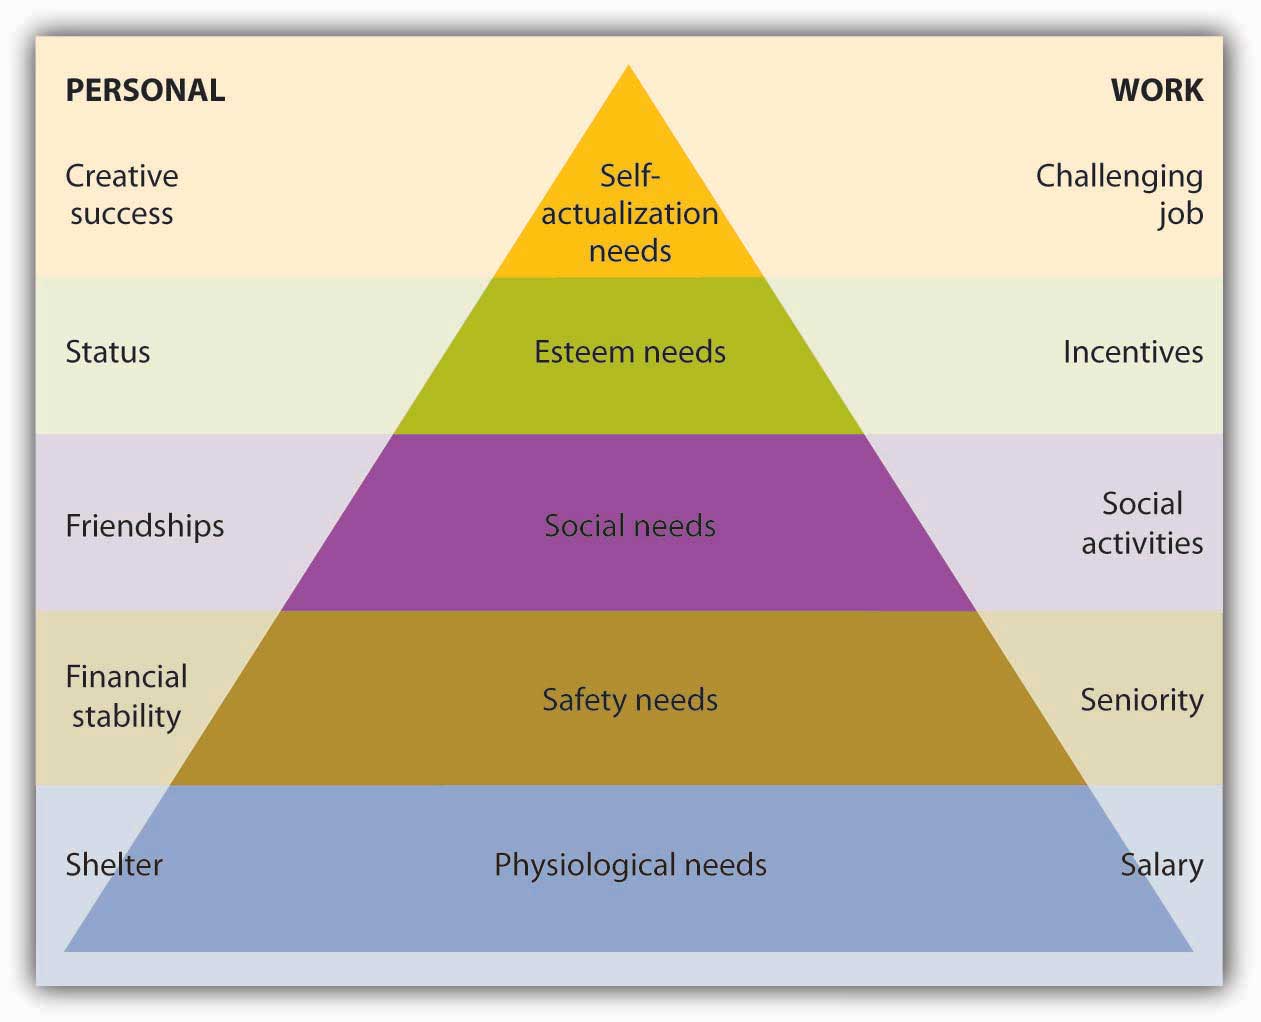 Maslow's Hierarchy-of-Needs Theory